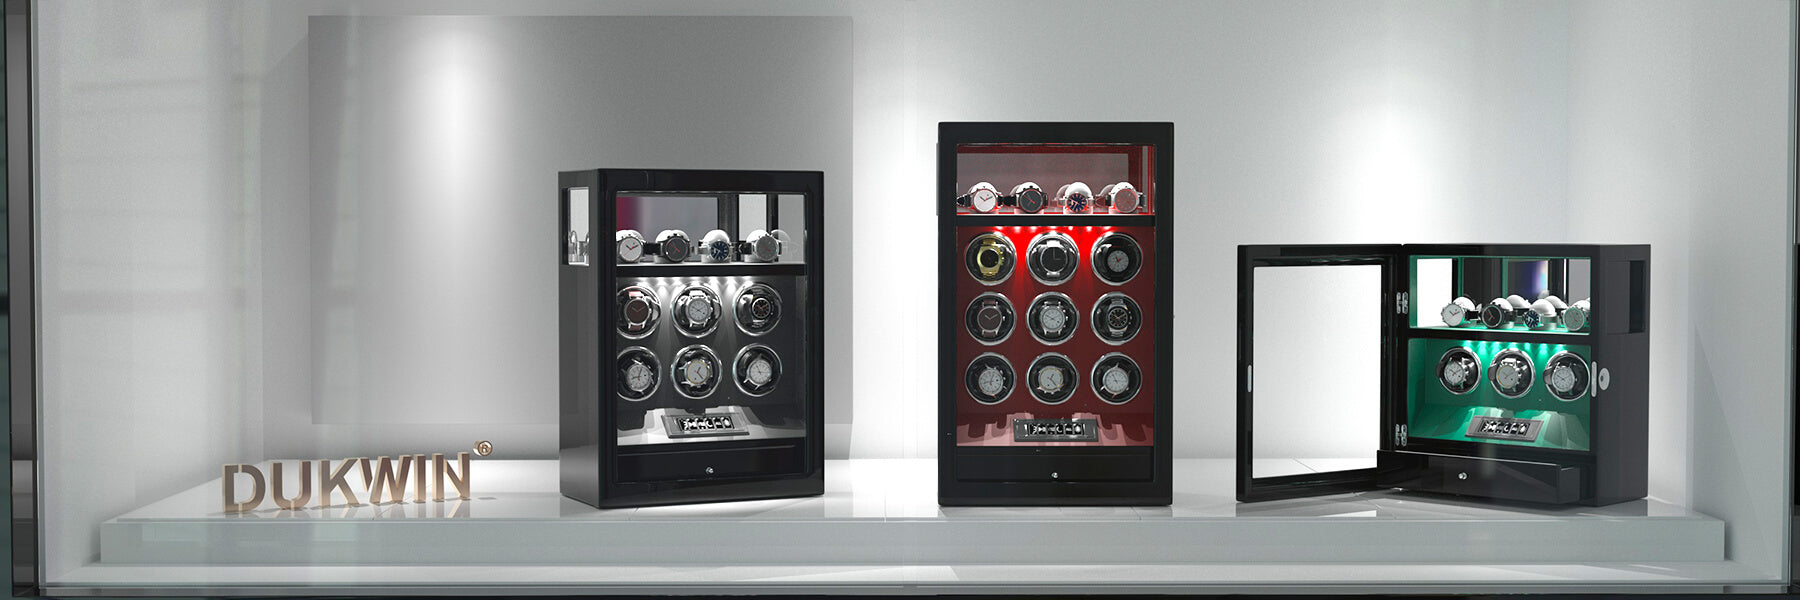 How to use a watch winder?